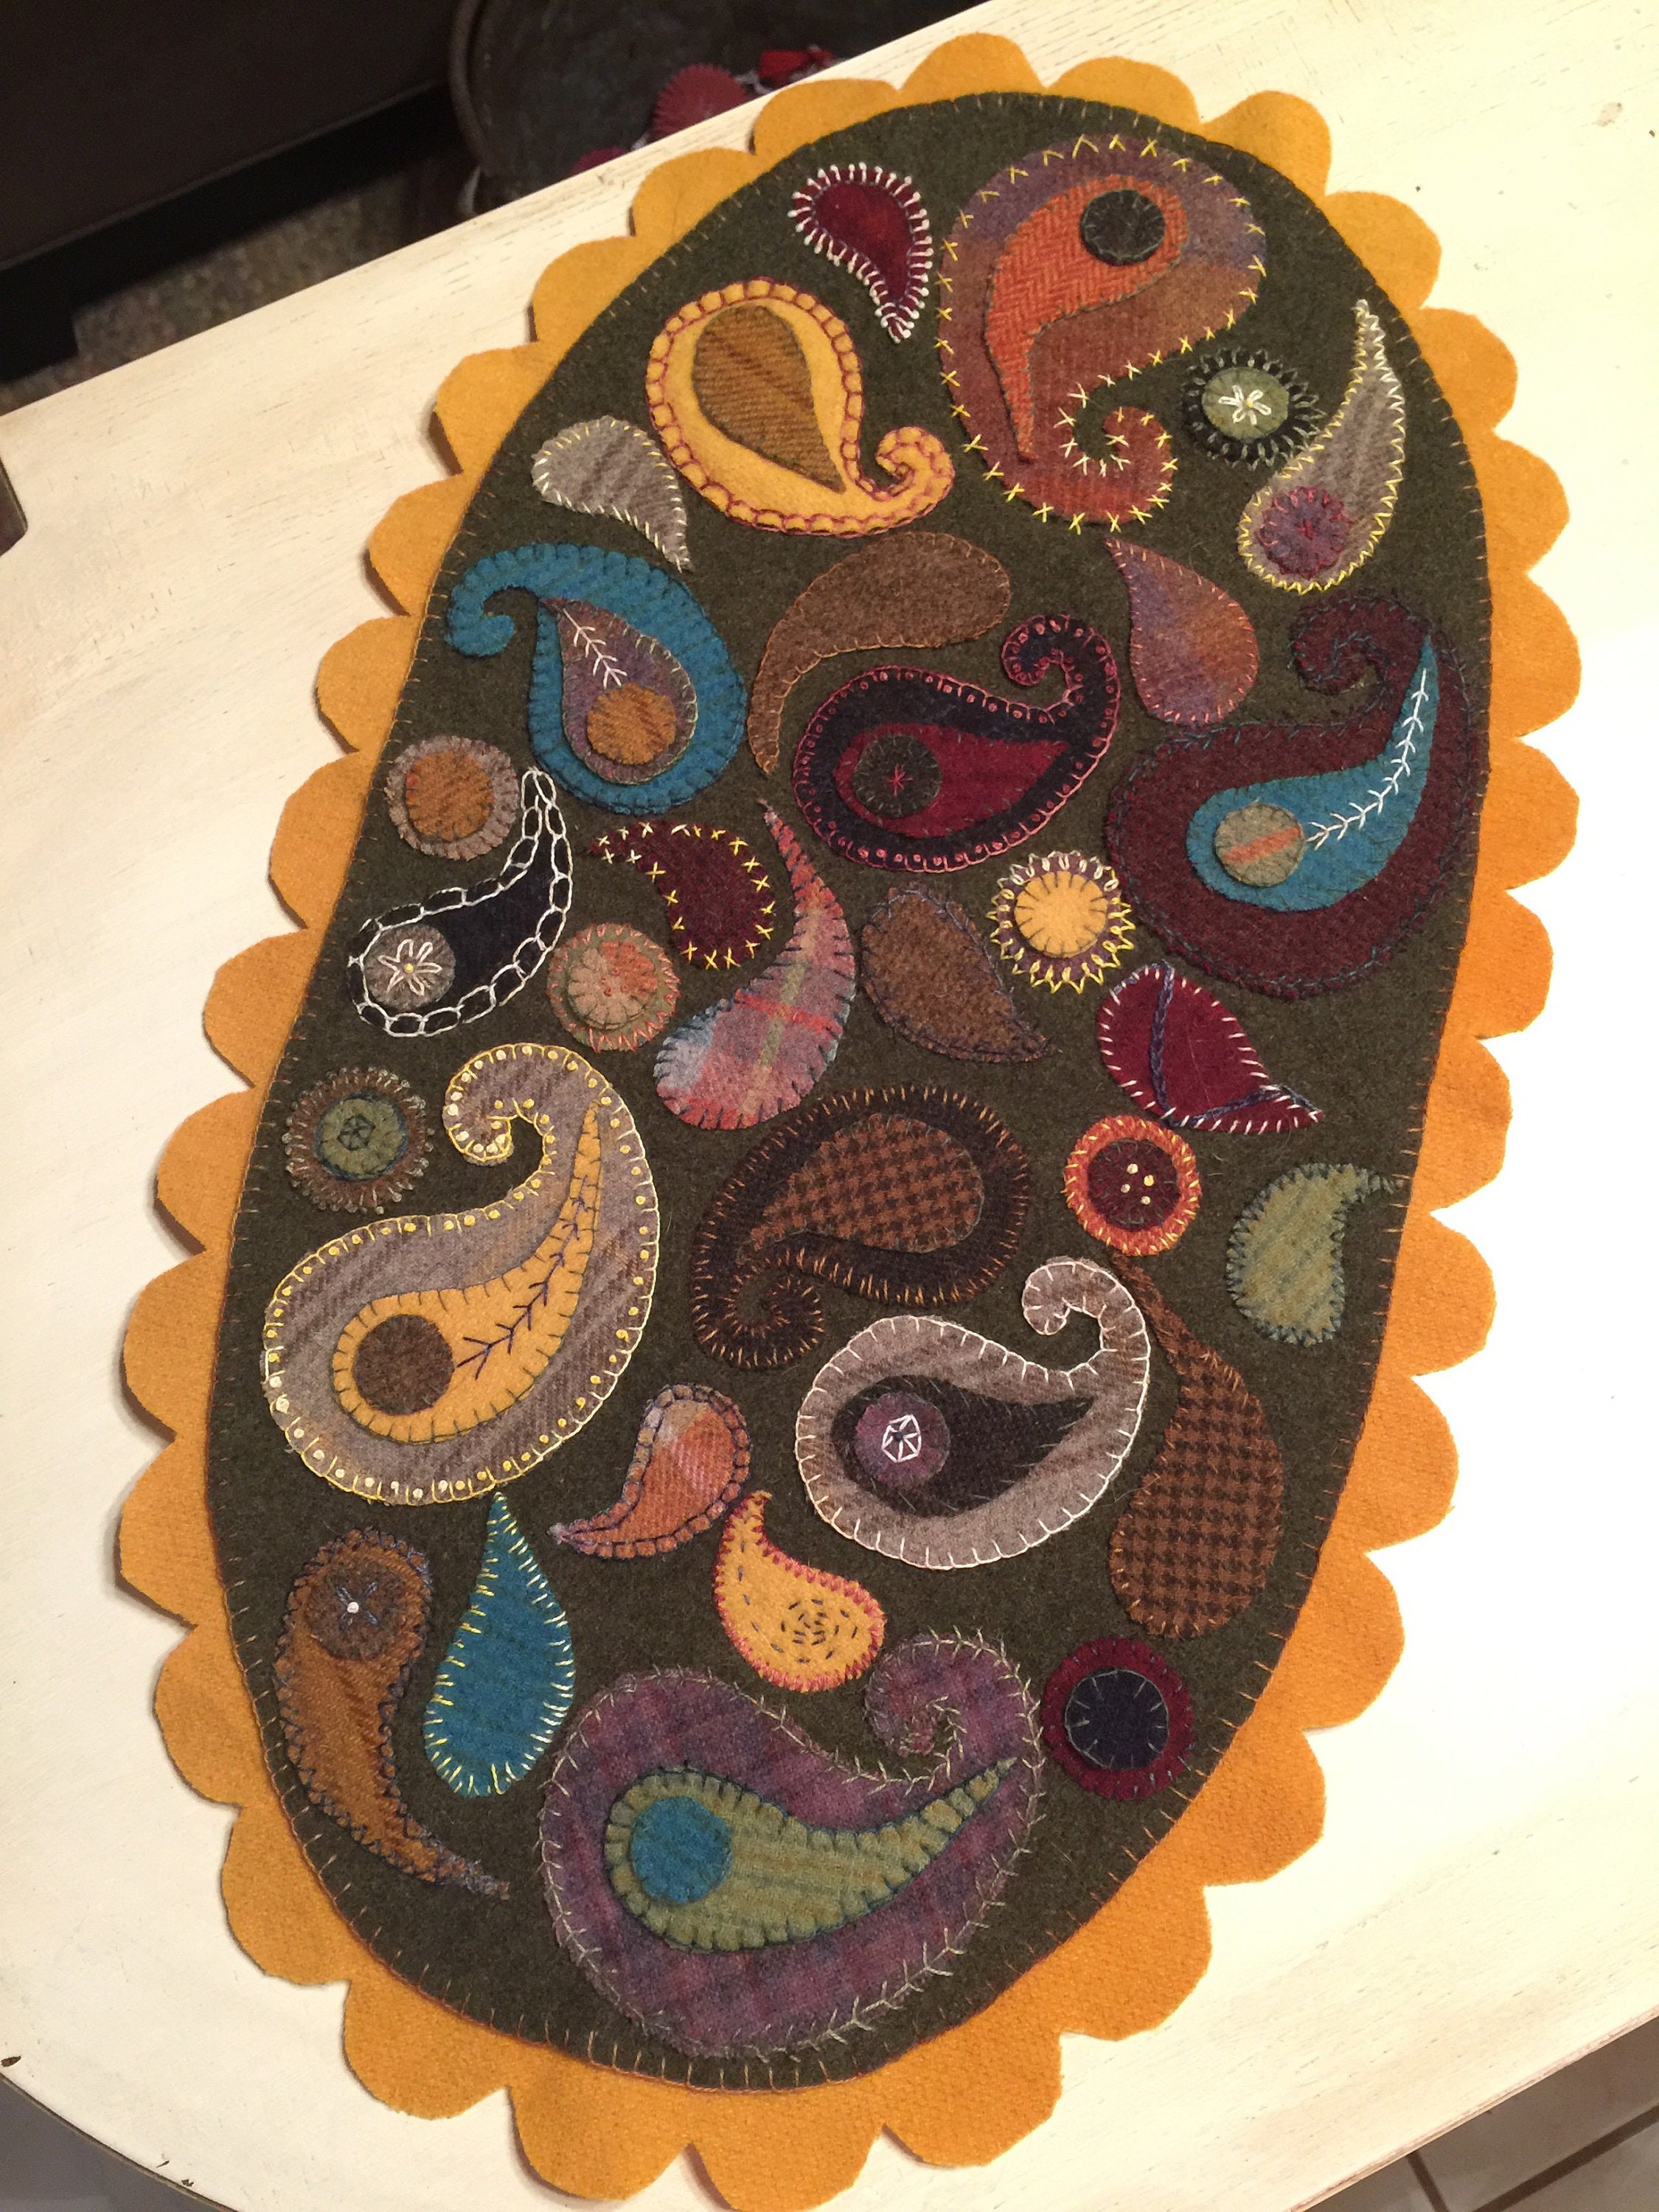 Wool Applique Kit: Round Hole Square Peg by Village Wool LLC